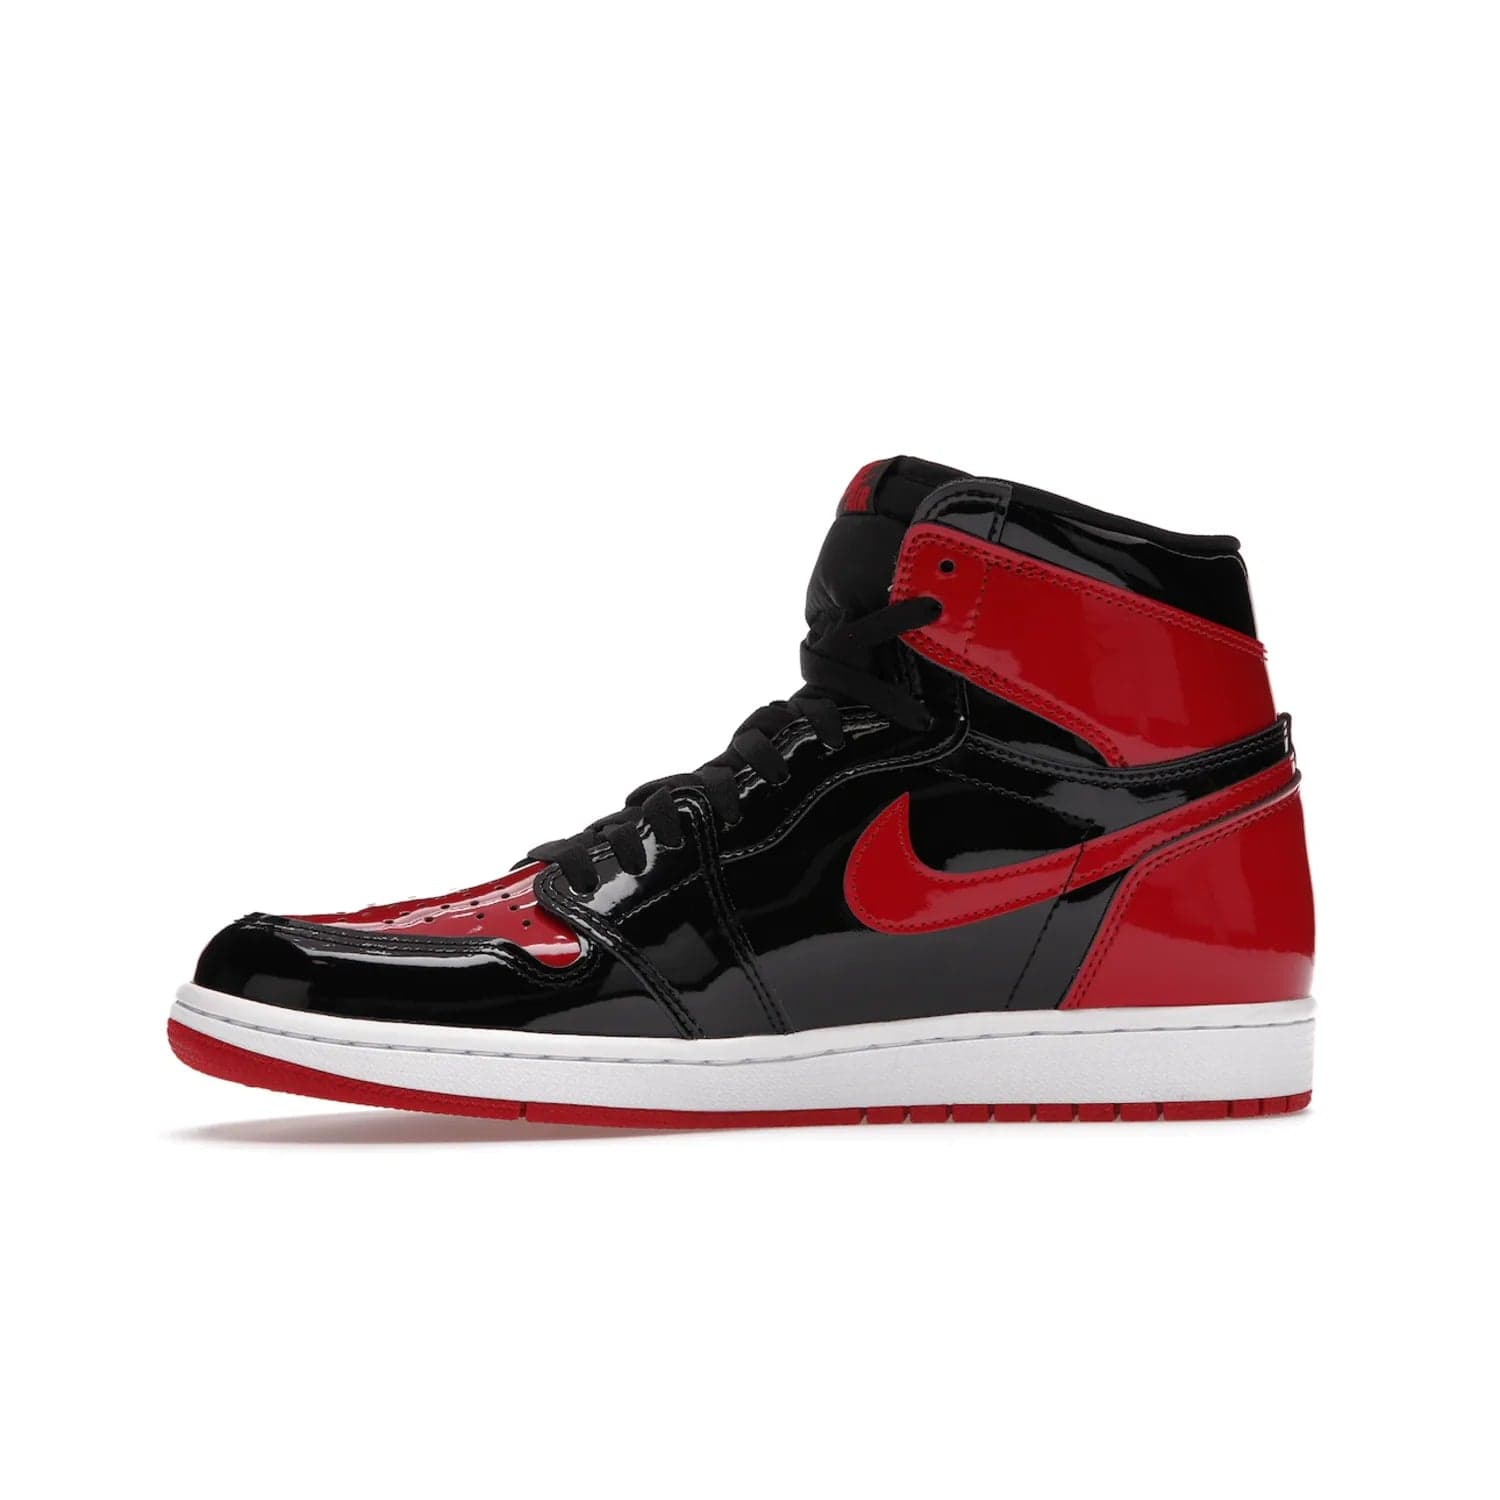 Jordan 1 Retro High OG Patent Bred - Image 18 - Only at www.BallersClubKickz.com - Introducing Air Jordan 1 Retro High OG Patent Bred - sleek patent leather upper, signature weaved Nike Air tongue and classic Wings logo on collar. Red and white sole complete signature look. Releasing December 2021 - perfect retro edition for holidays.